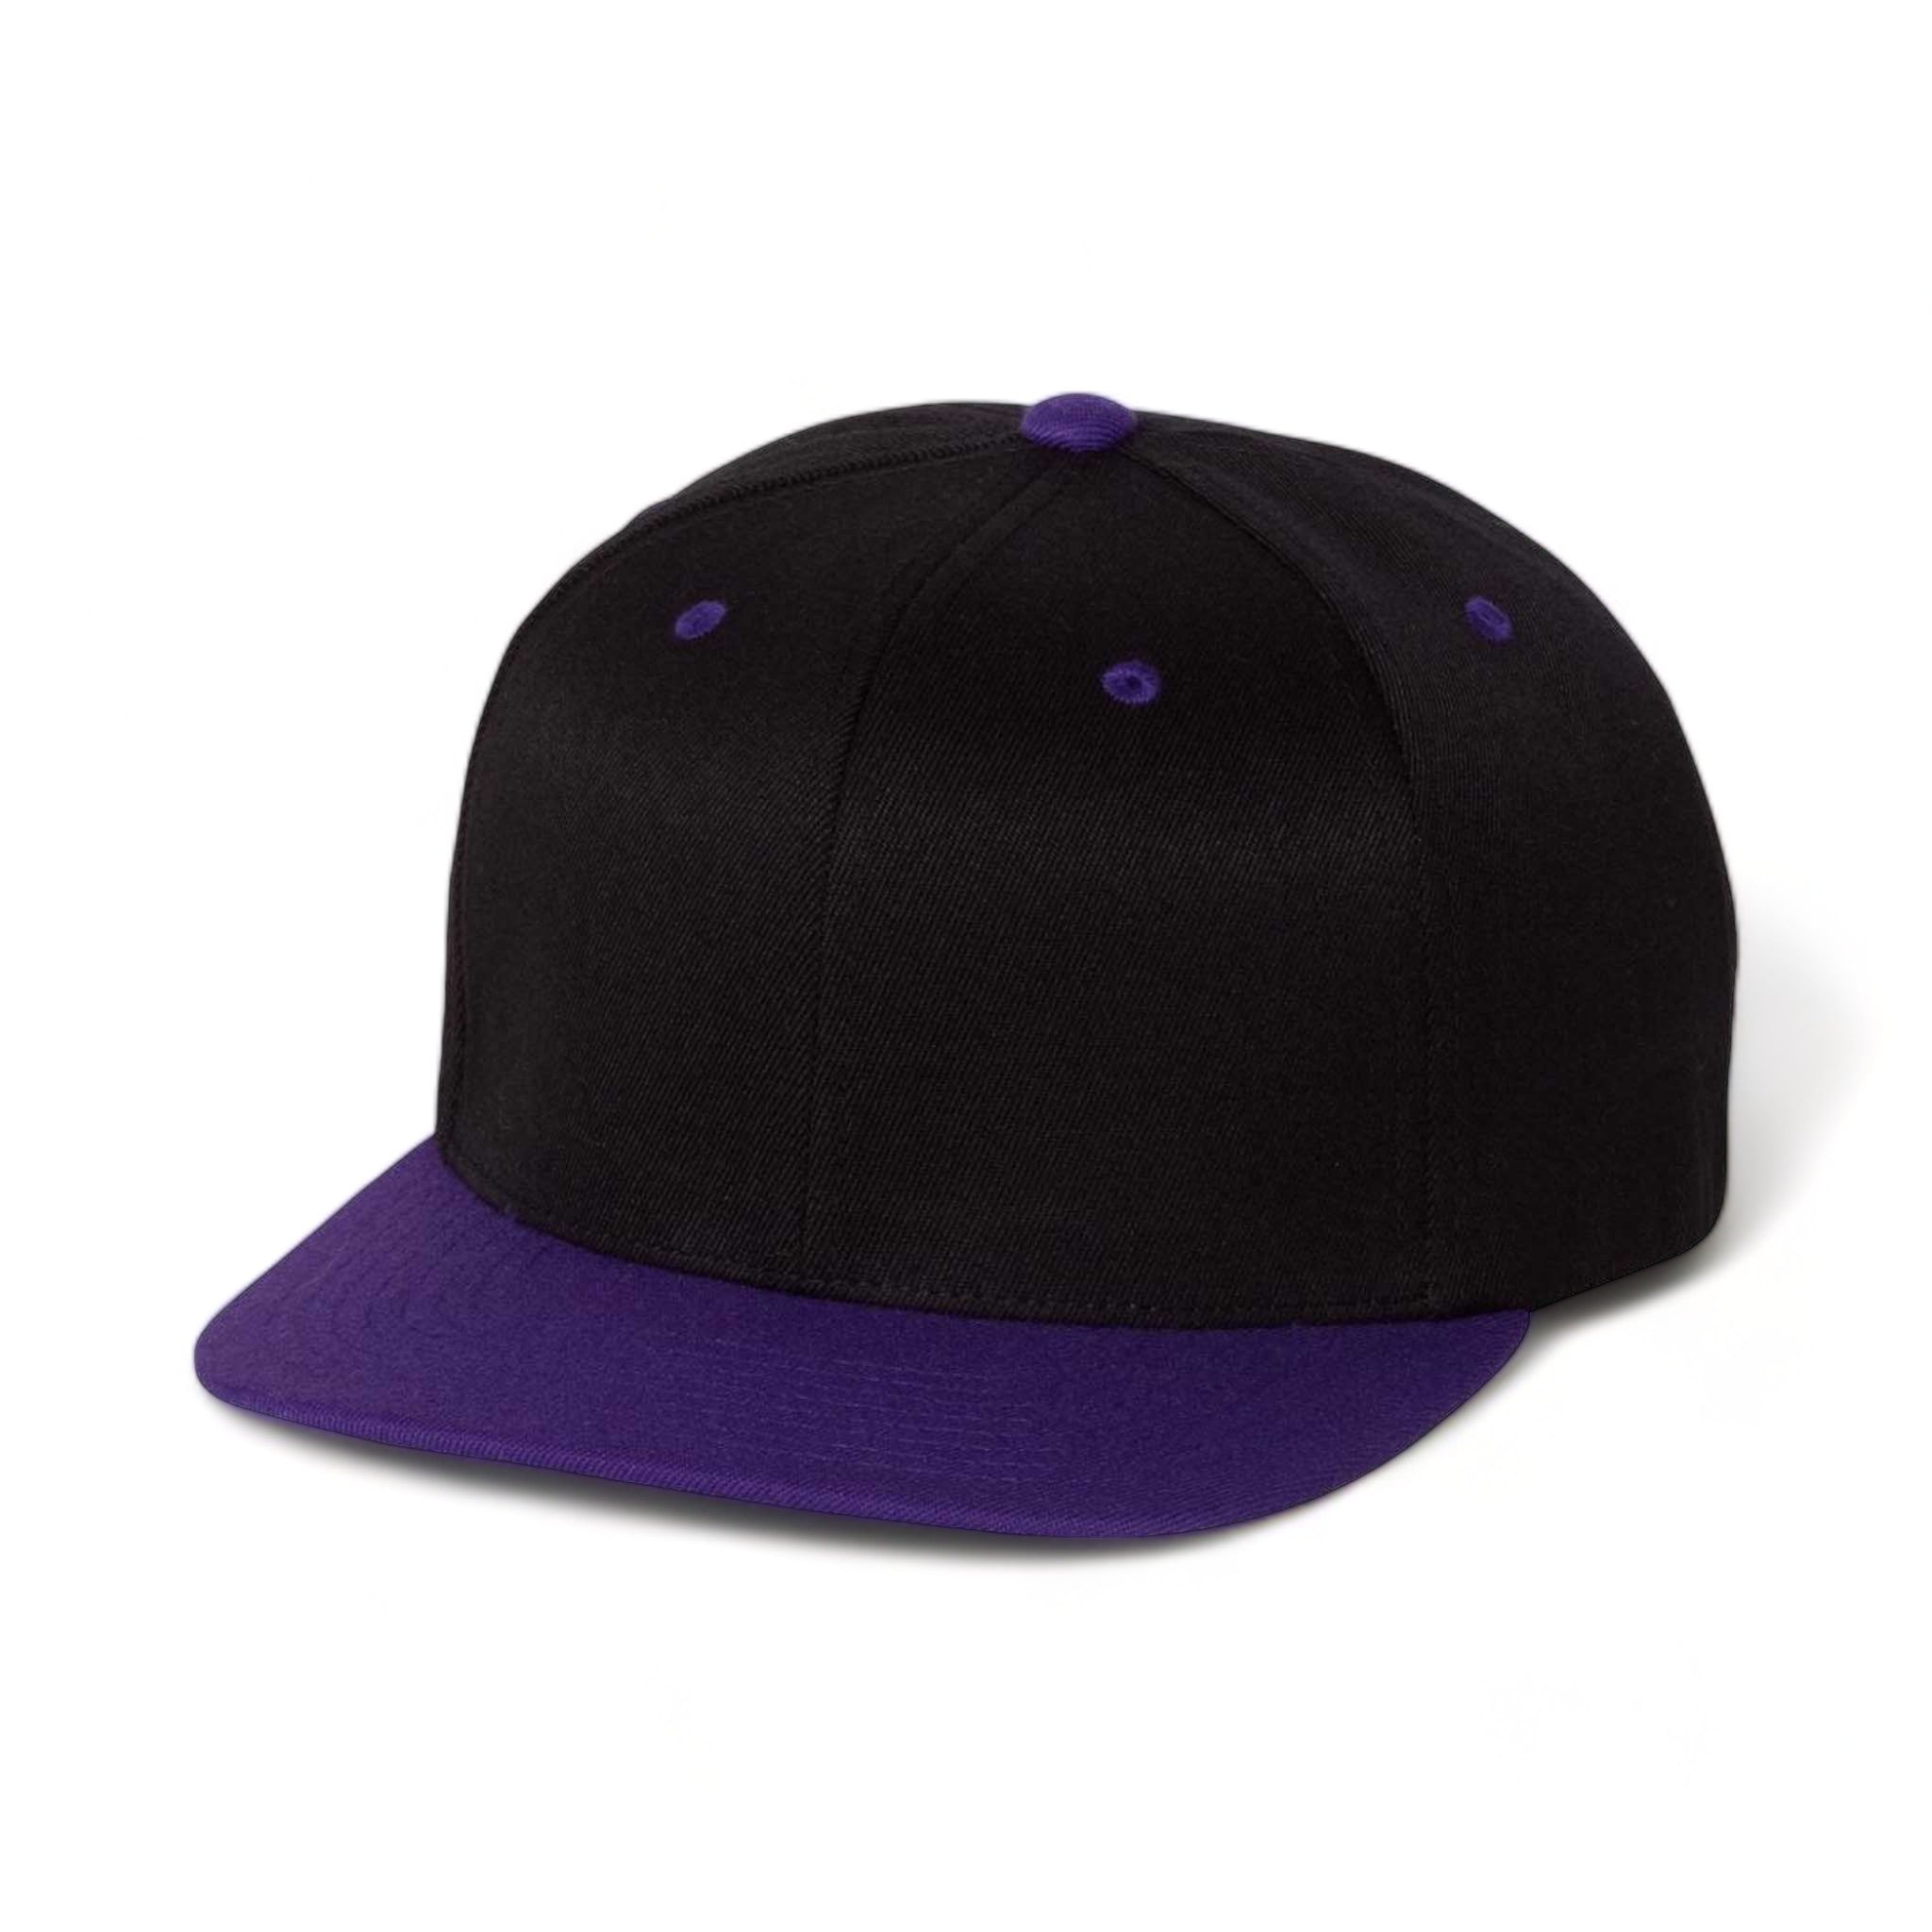 Front view of Flexfit 110F custom hat in black and purple